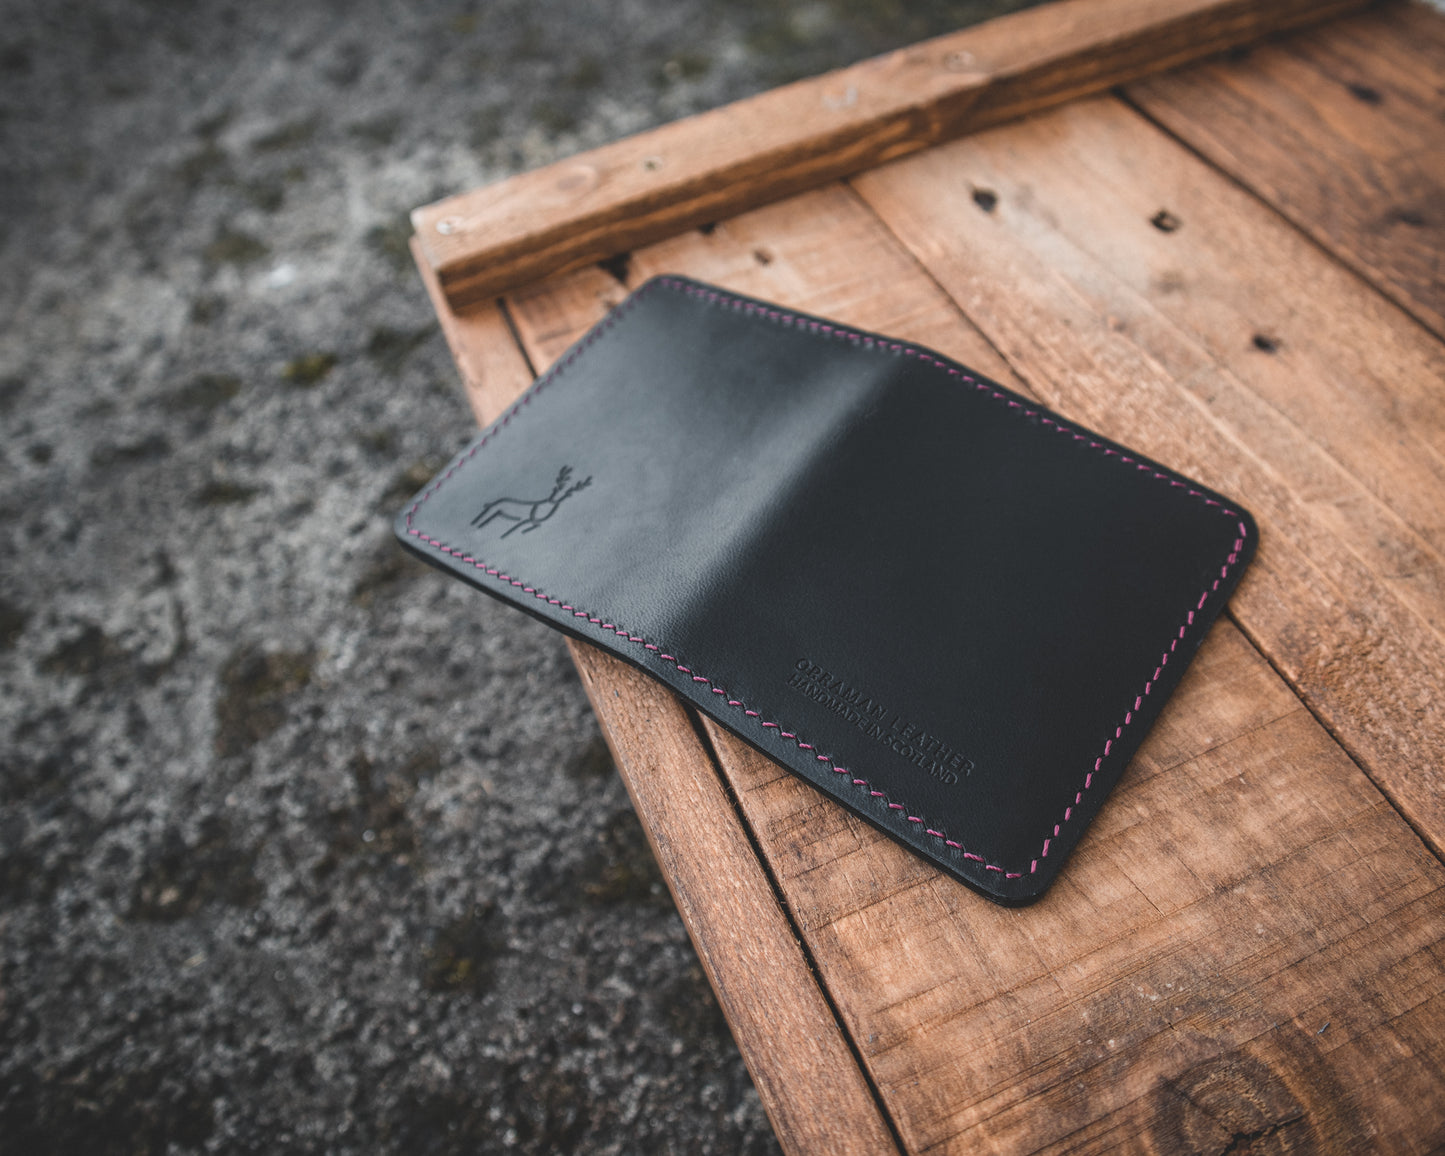 Limited Edition! The Nevis Leather Wallet Lined with Handmade Tartan!